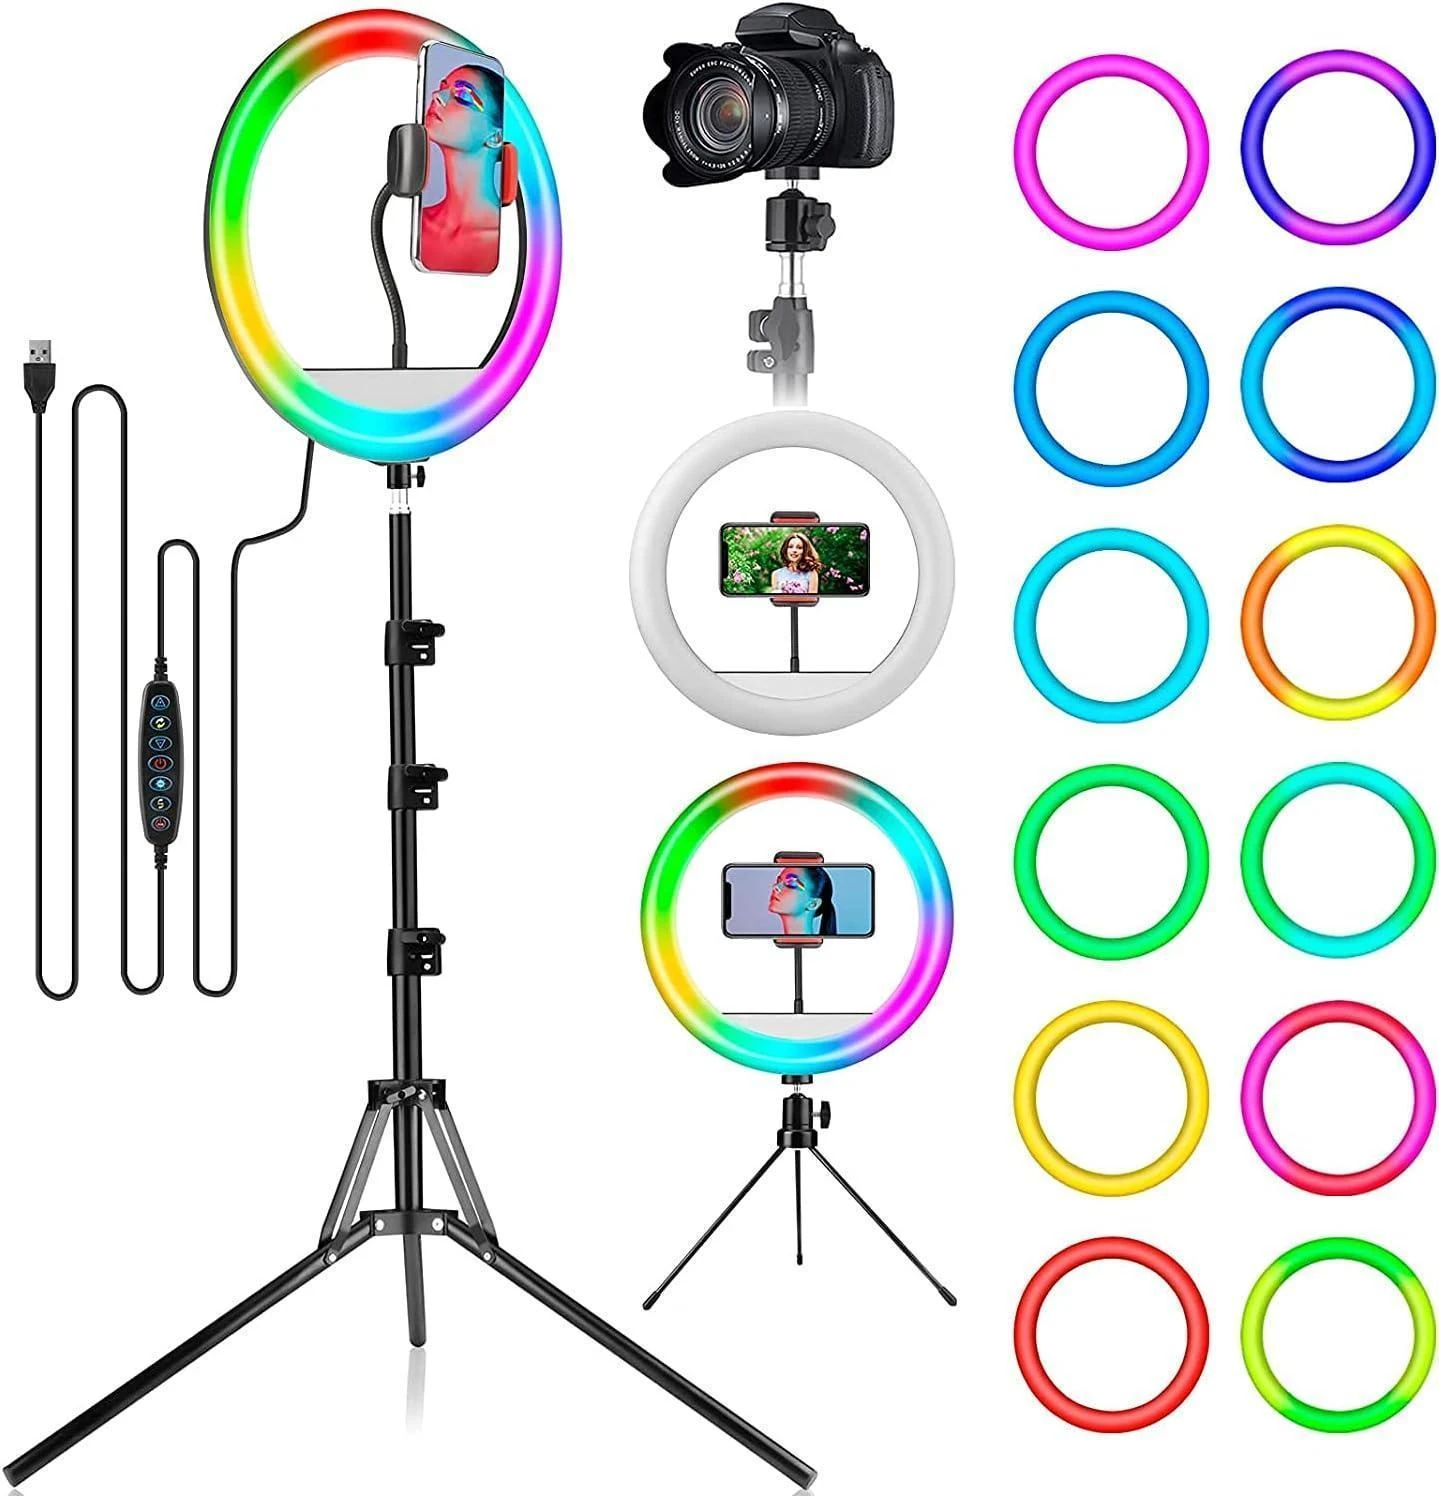 SELFIE RING 12 INCH RGB LIGHT WITH STAND 